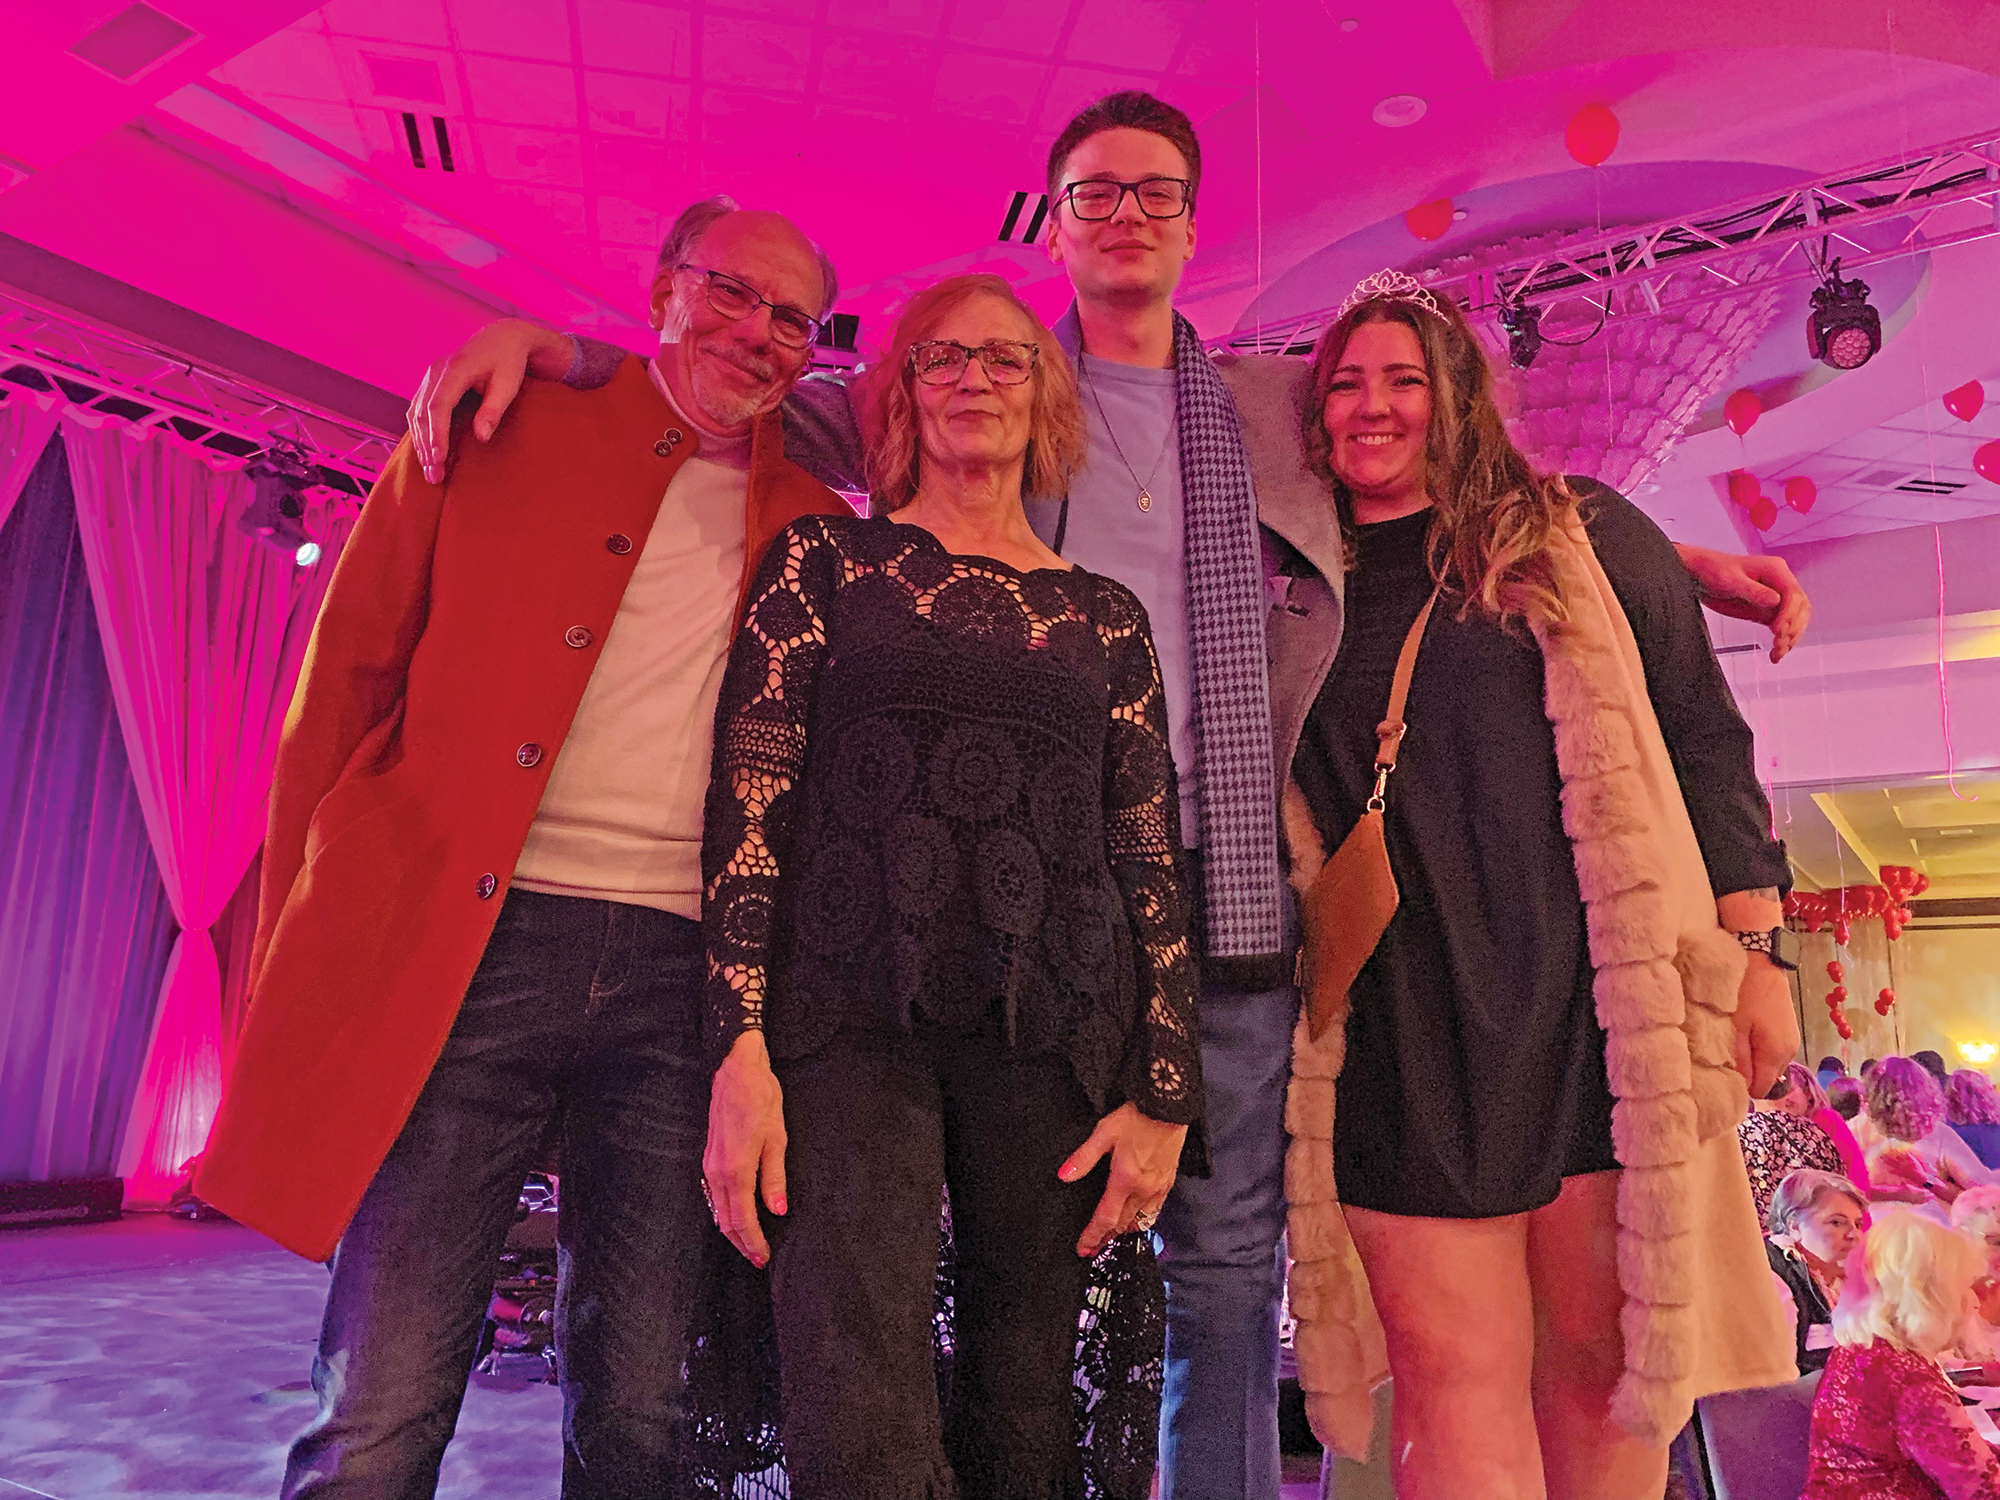 A photograph taken from a low angle pointing up of a family of four: Wife, husband, son, and daugher in pink light on an event stage